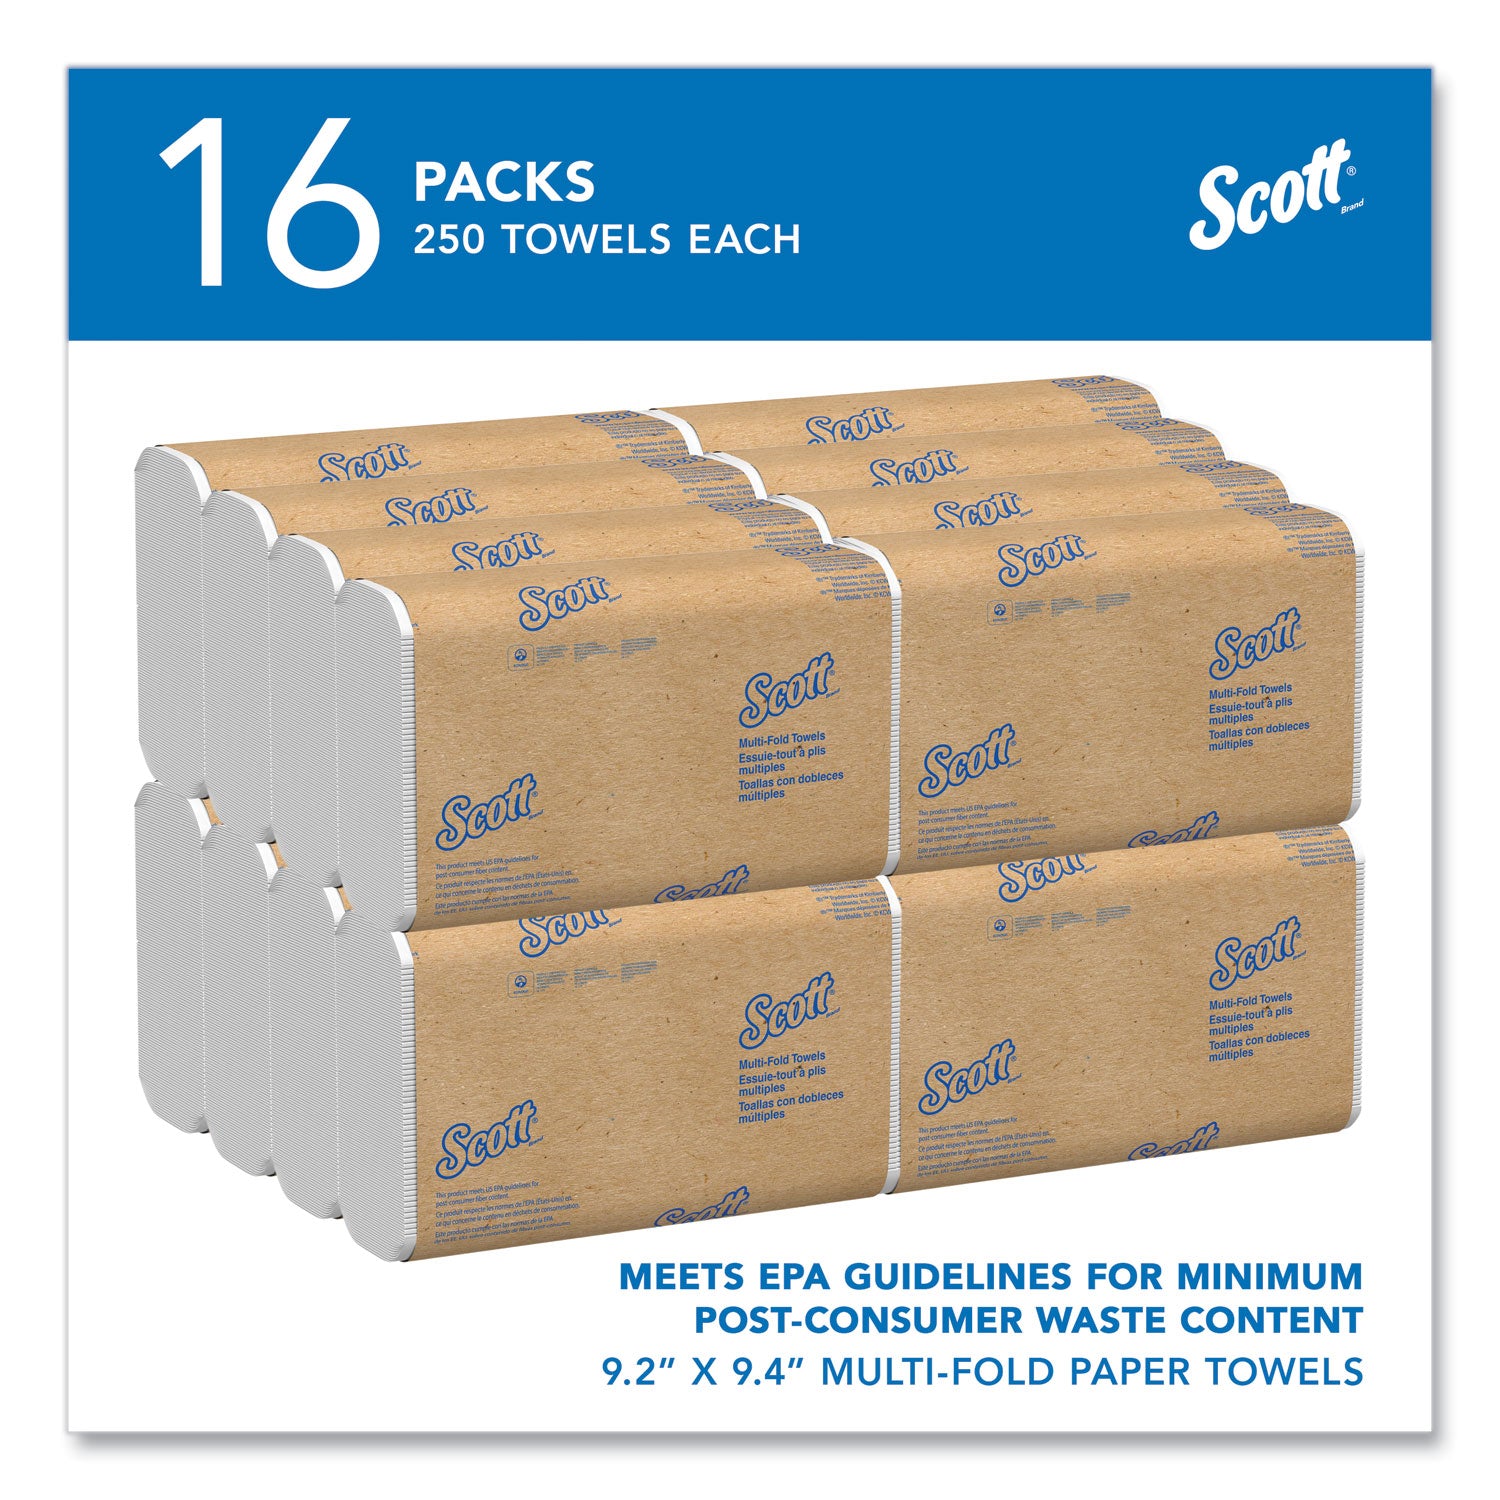 Essential Multi-Fold Towels, Absorbency Pockets, 1-Ply, 9.2 x 9.4, White, 250/Packs, 16 Packs/Carton - 